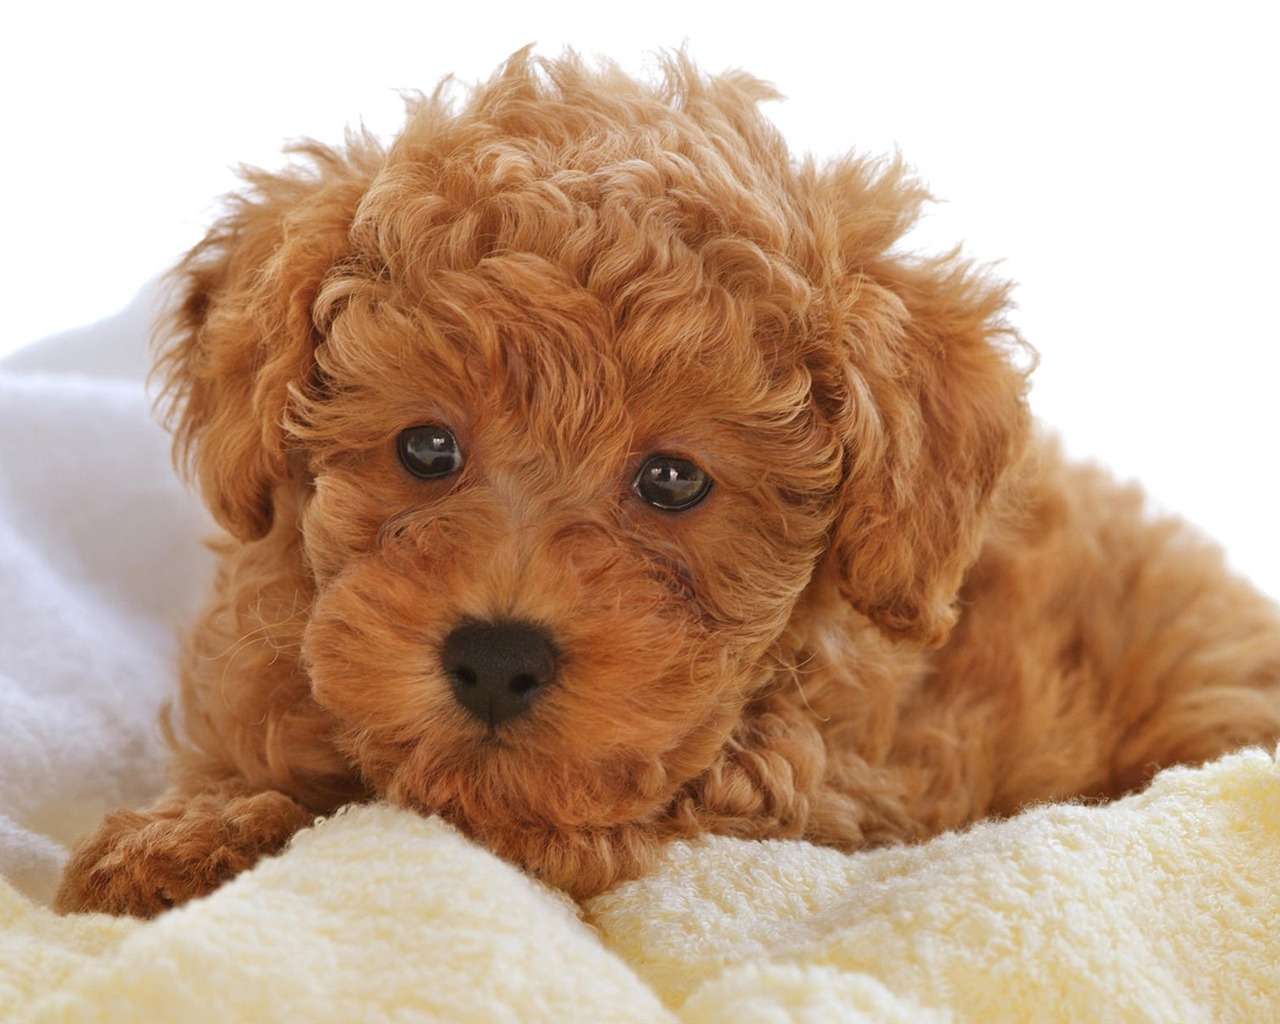 Puppy Photo HD wallpapers (10) #19 - 1280x1024